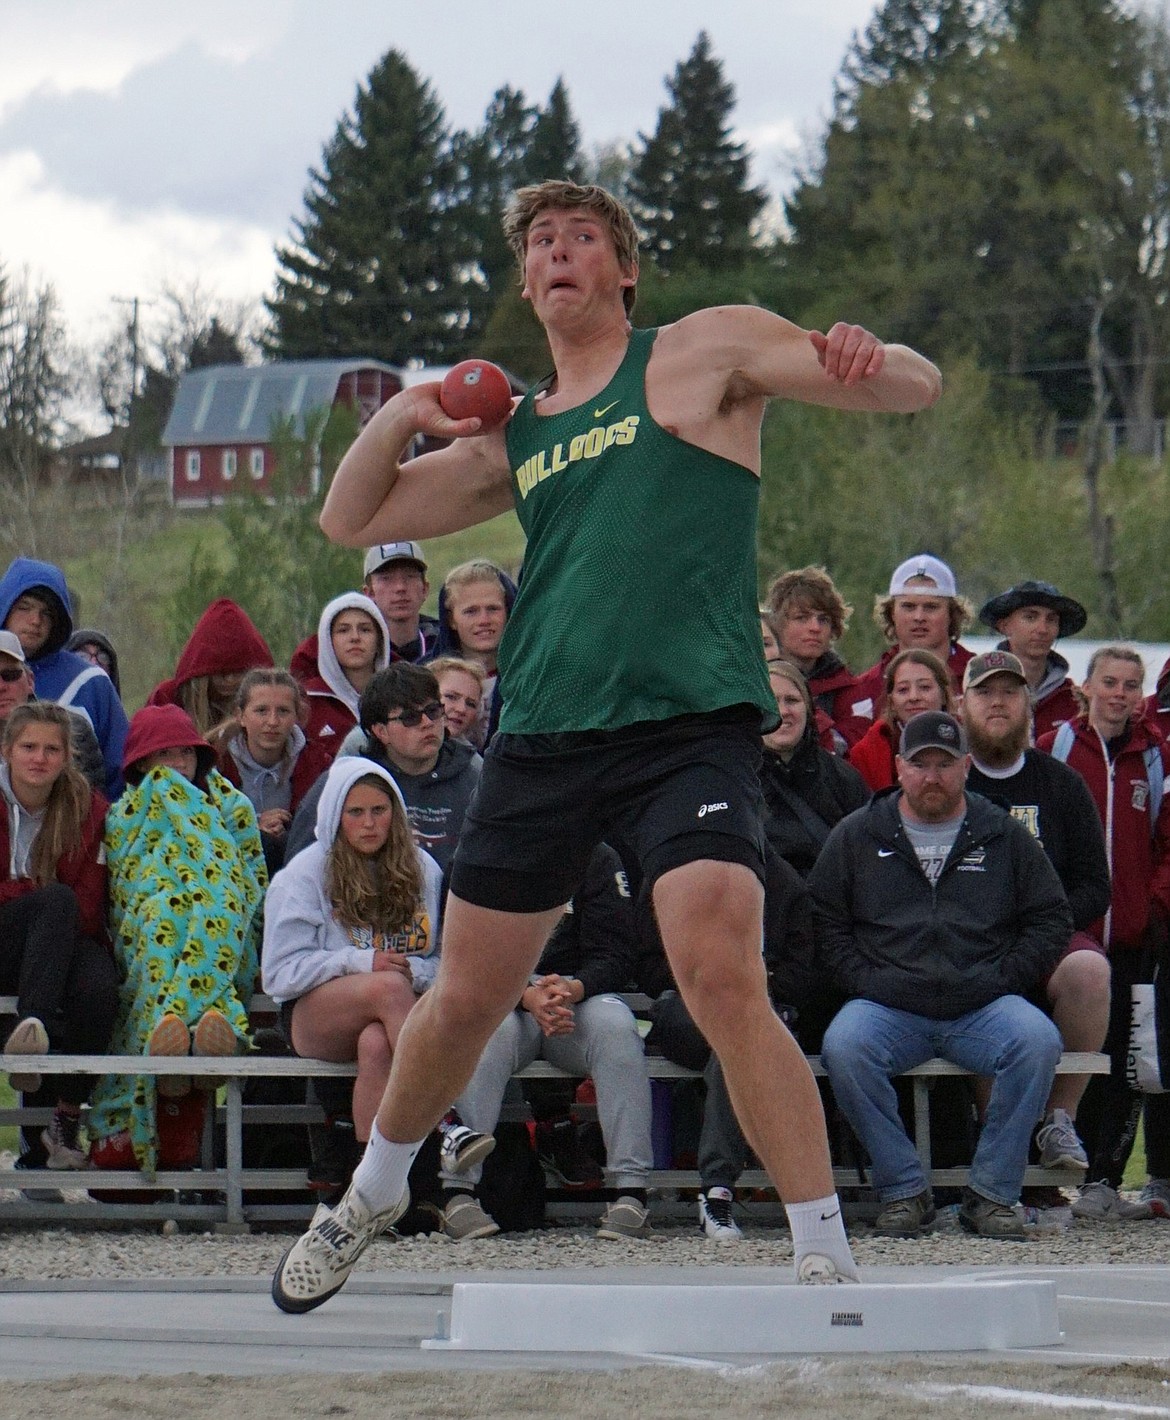 Whitefish senior Talon Holmquist with a record-breaking throw in shot put to take the title at the Western A Divisional meet in Hamilton on Friday and Saturday. (Matt Weller photo)